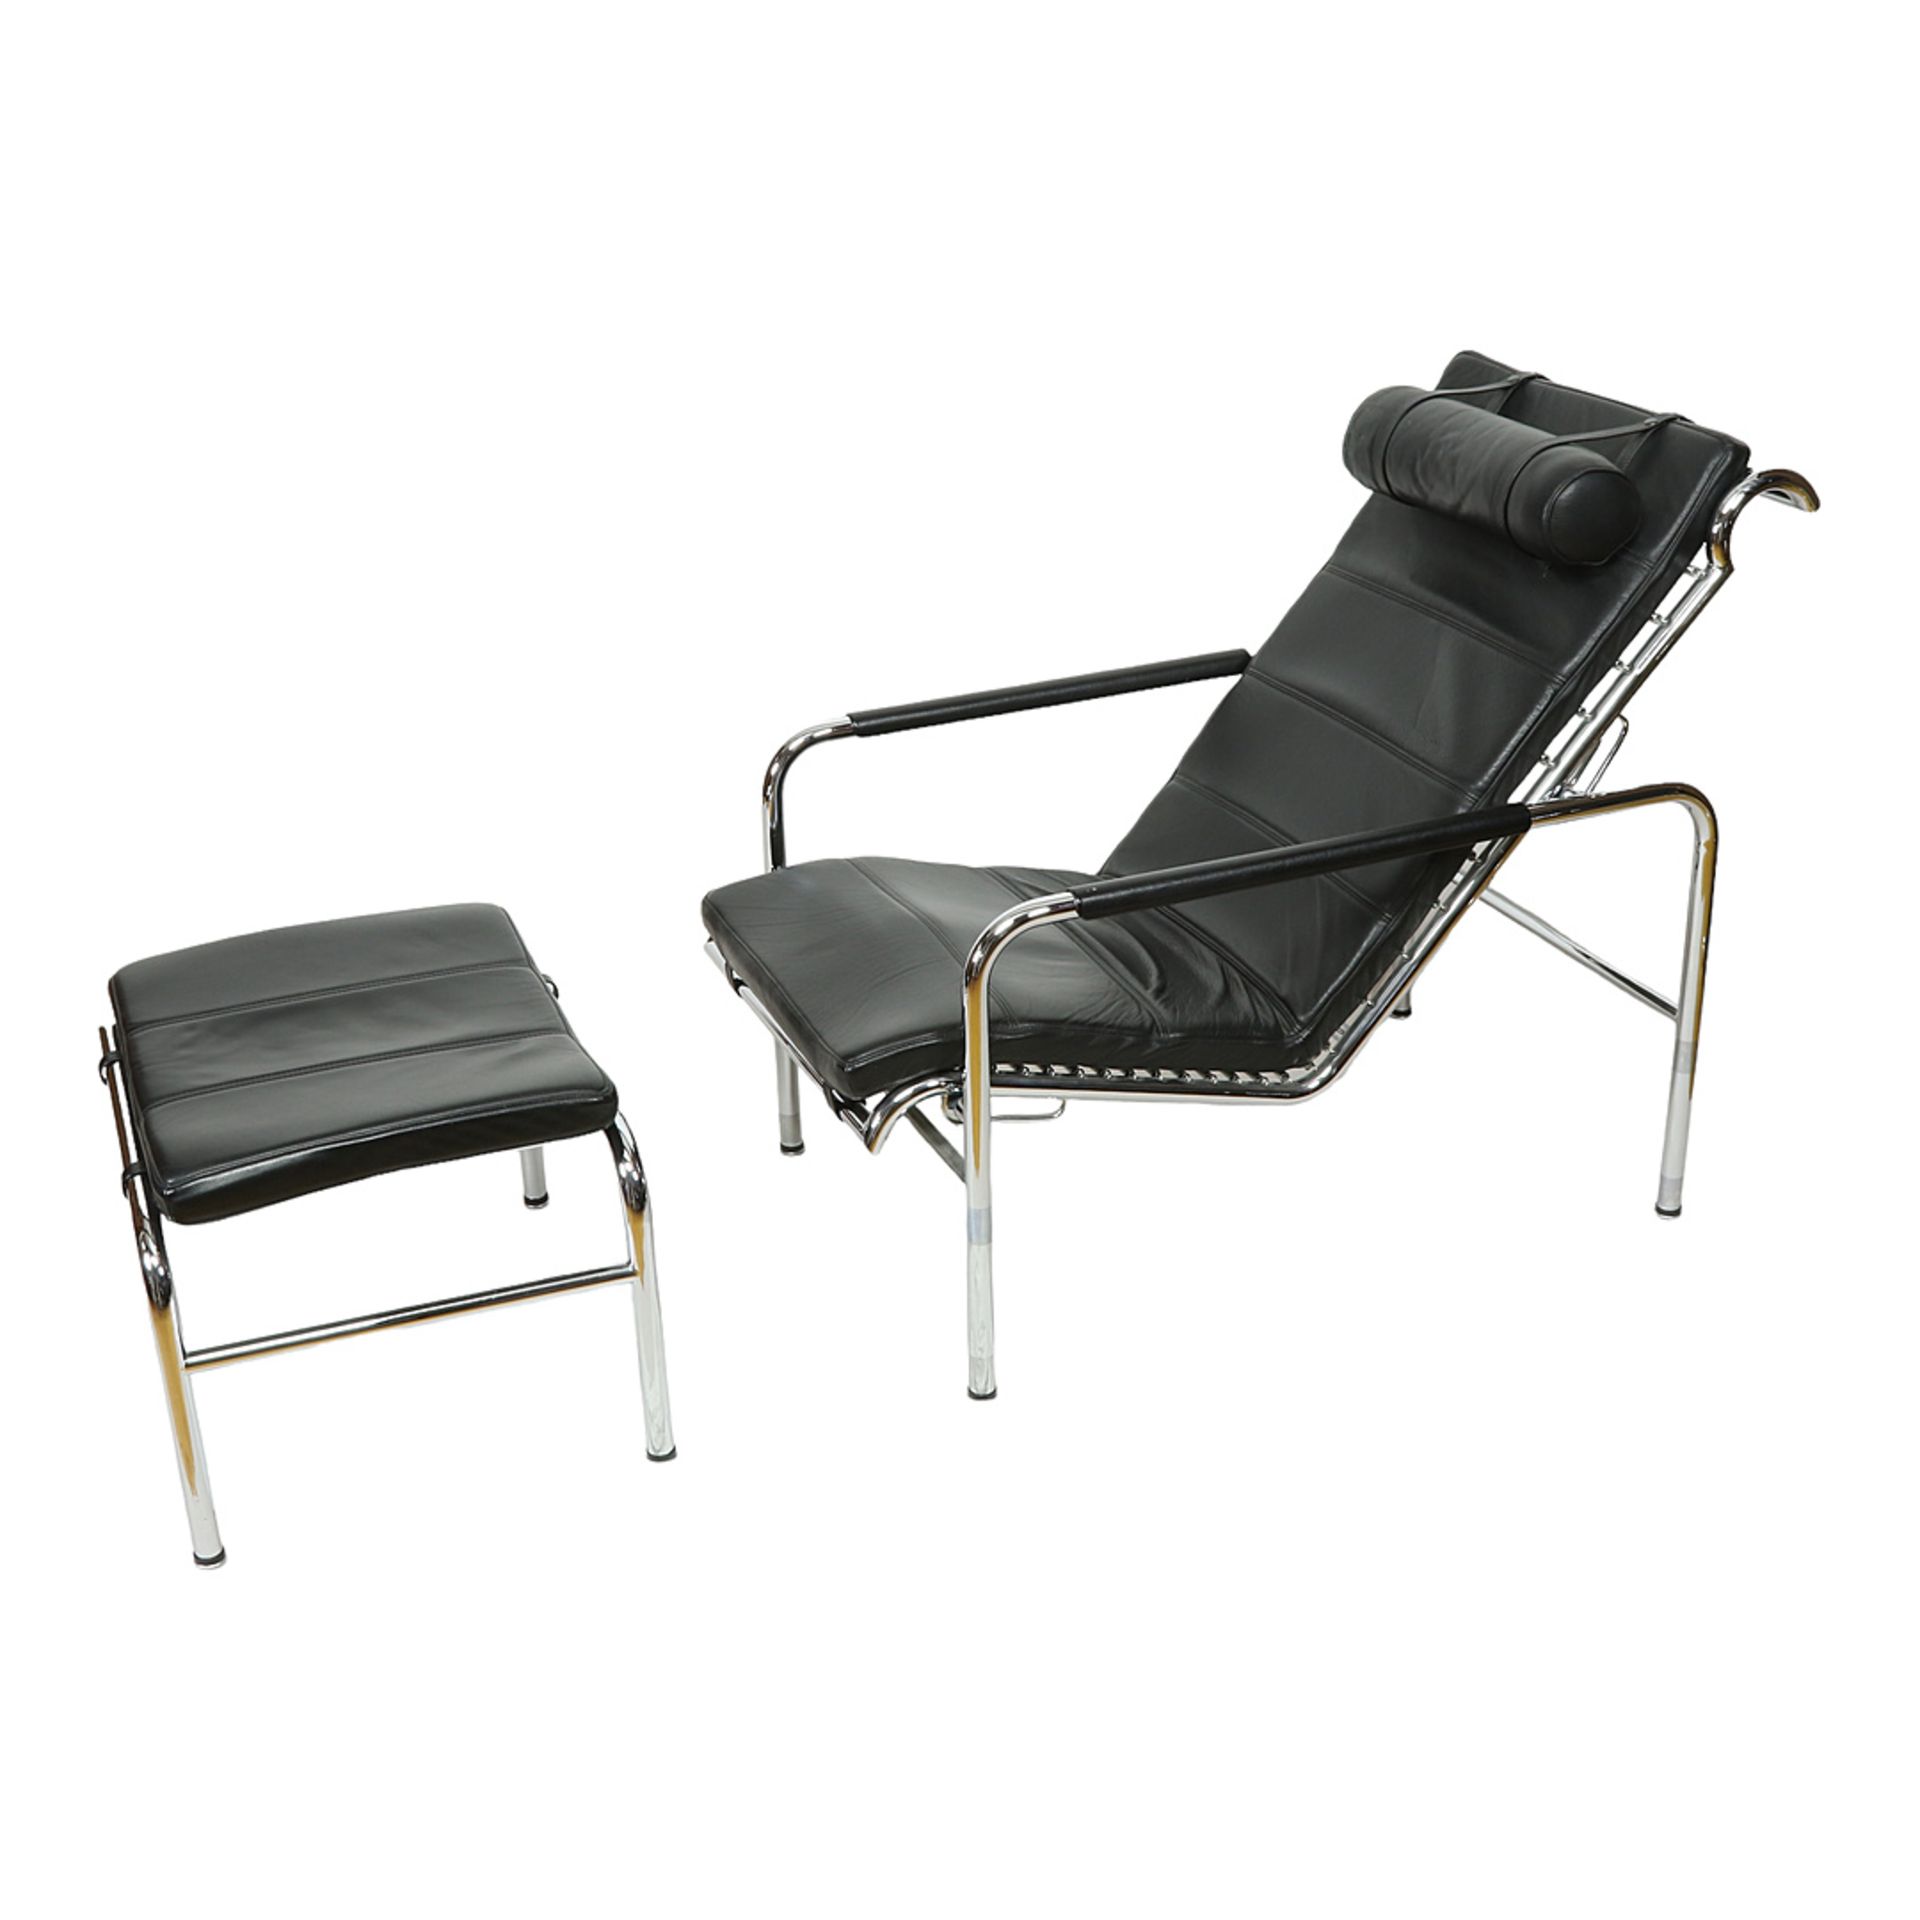 Chaise longue with stool, chrome-plated steel, black leather cover - Image 2 of 9